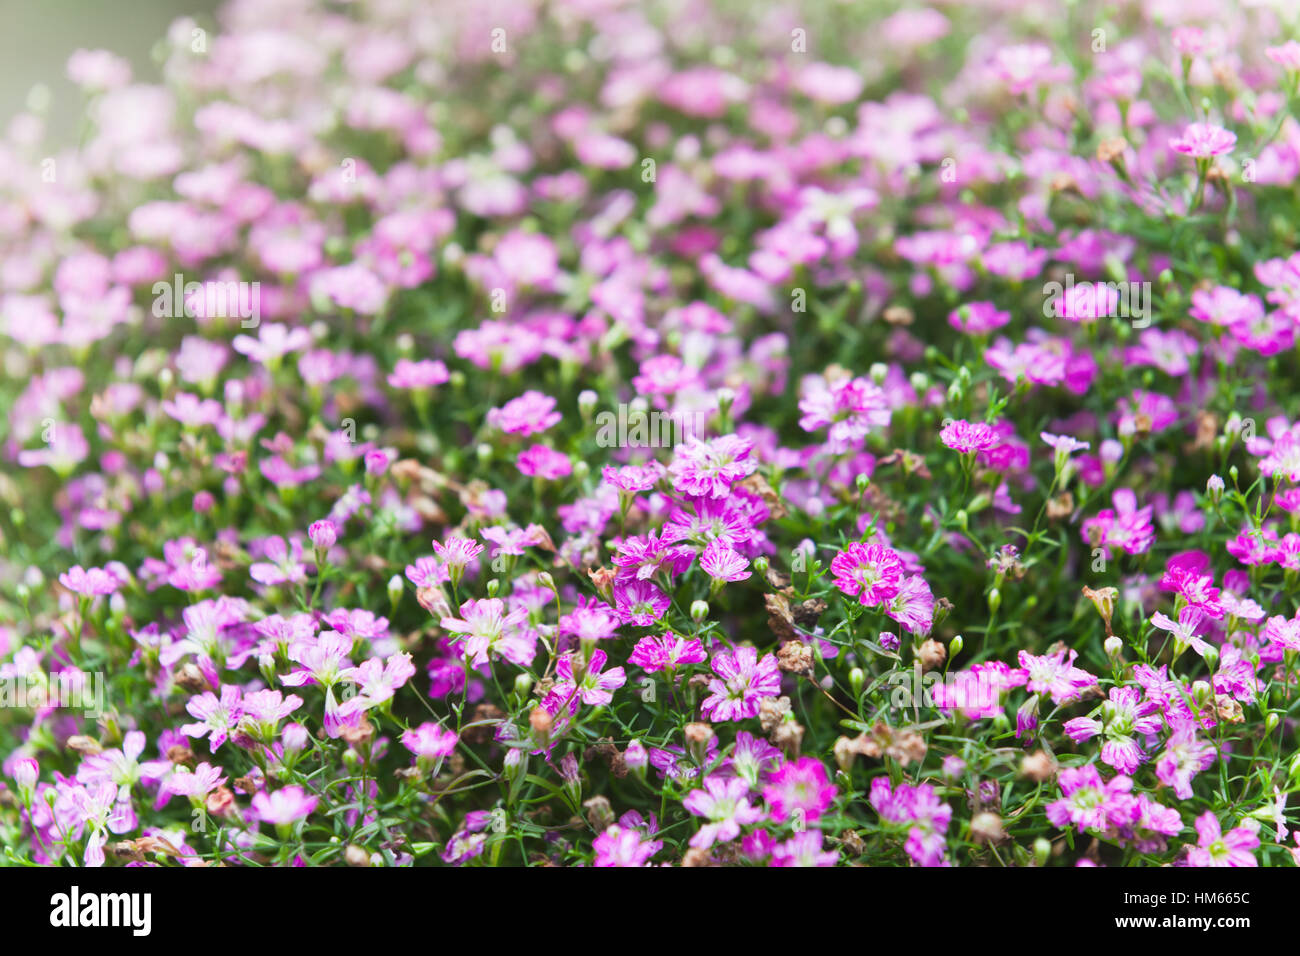 Field of pink dianthus flowers, selective focus Stock Photo